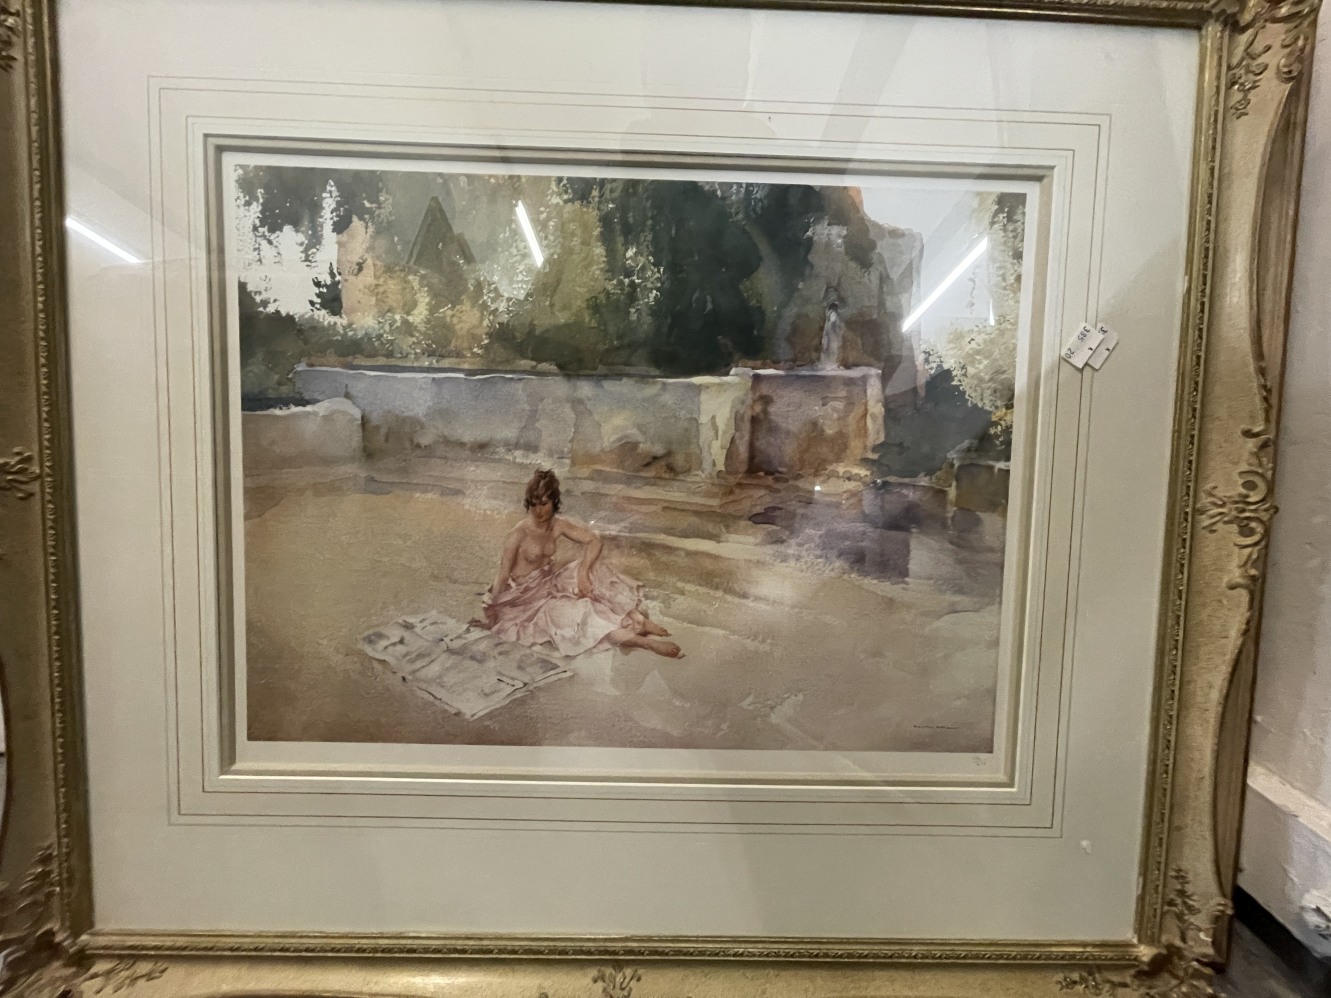 Limited Edition Prints: 20th cent. Sir William Russell Flint (1880-1969) 136/675 WRF blind stamp,